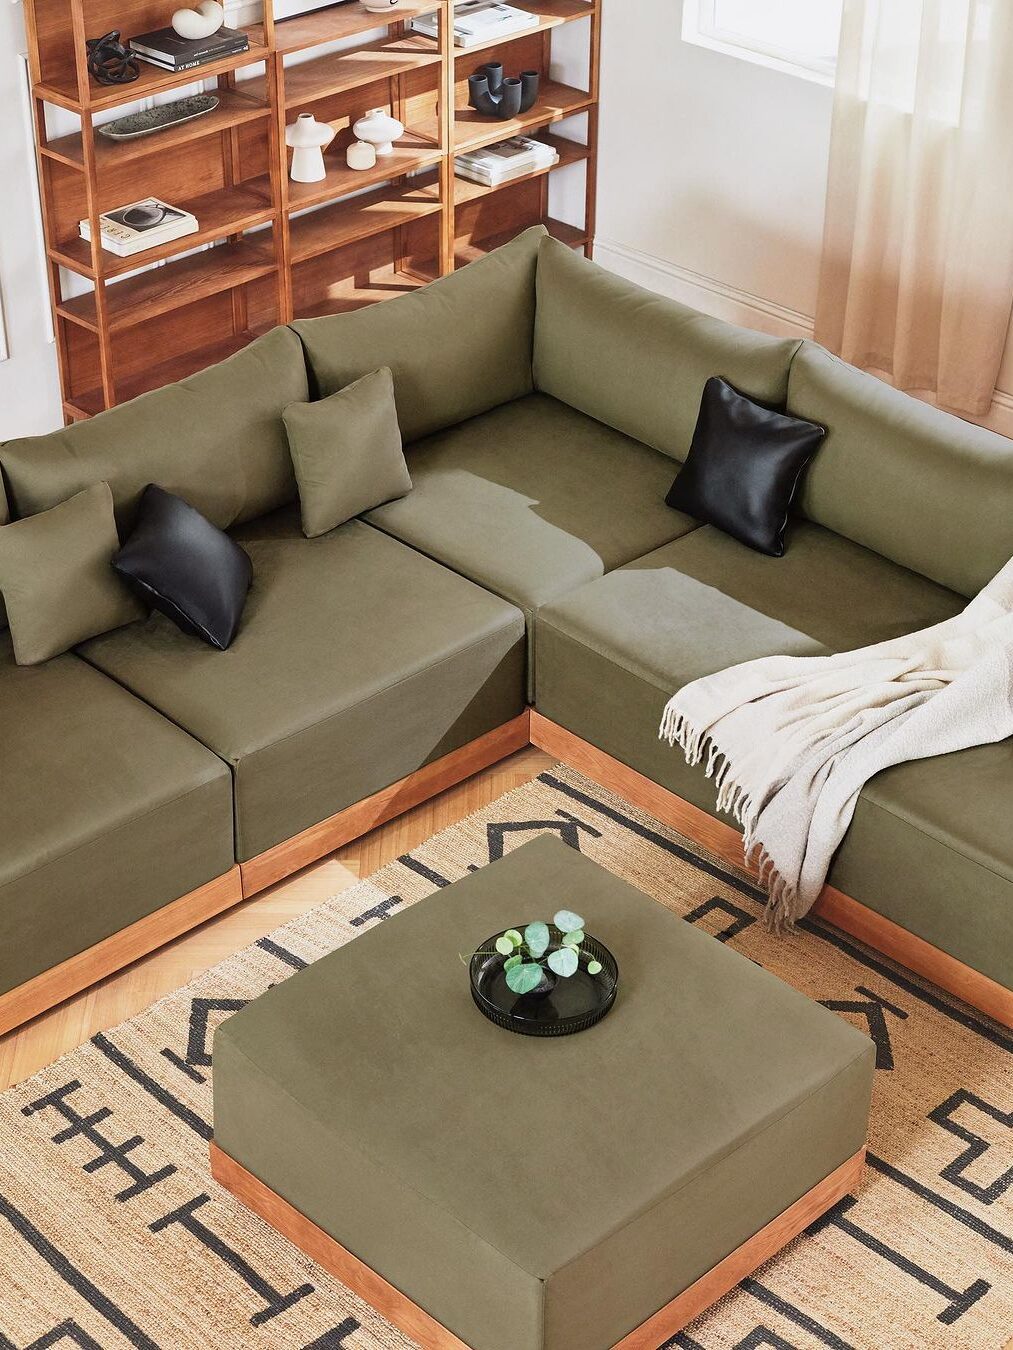 A sage green Inside Weather modular couch with matching green pillow and black leather pillows in a living room setting.